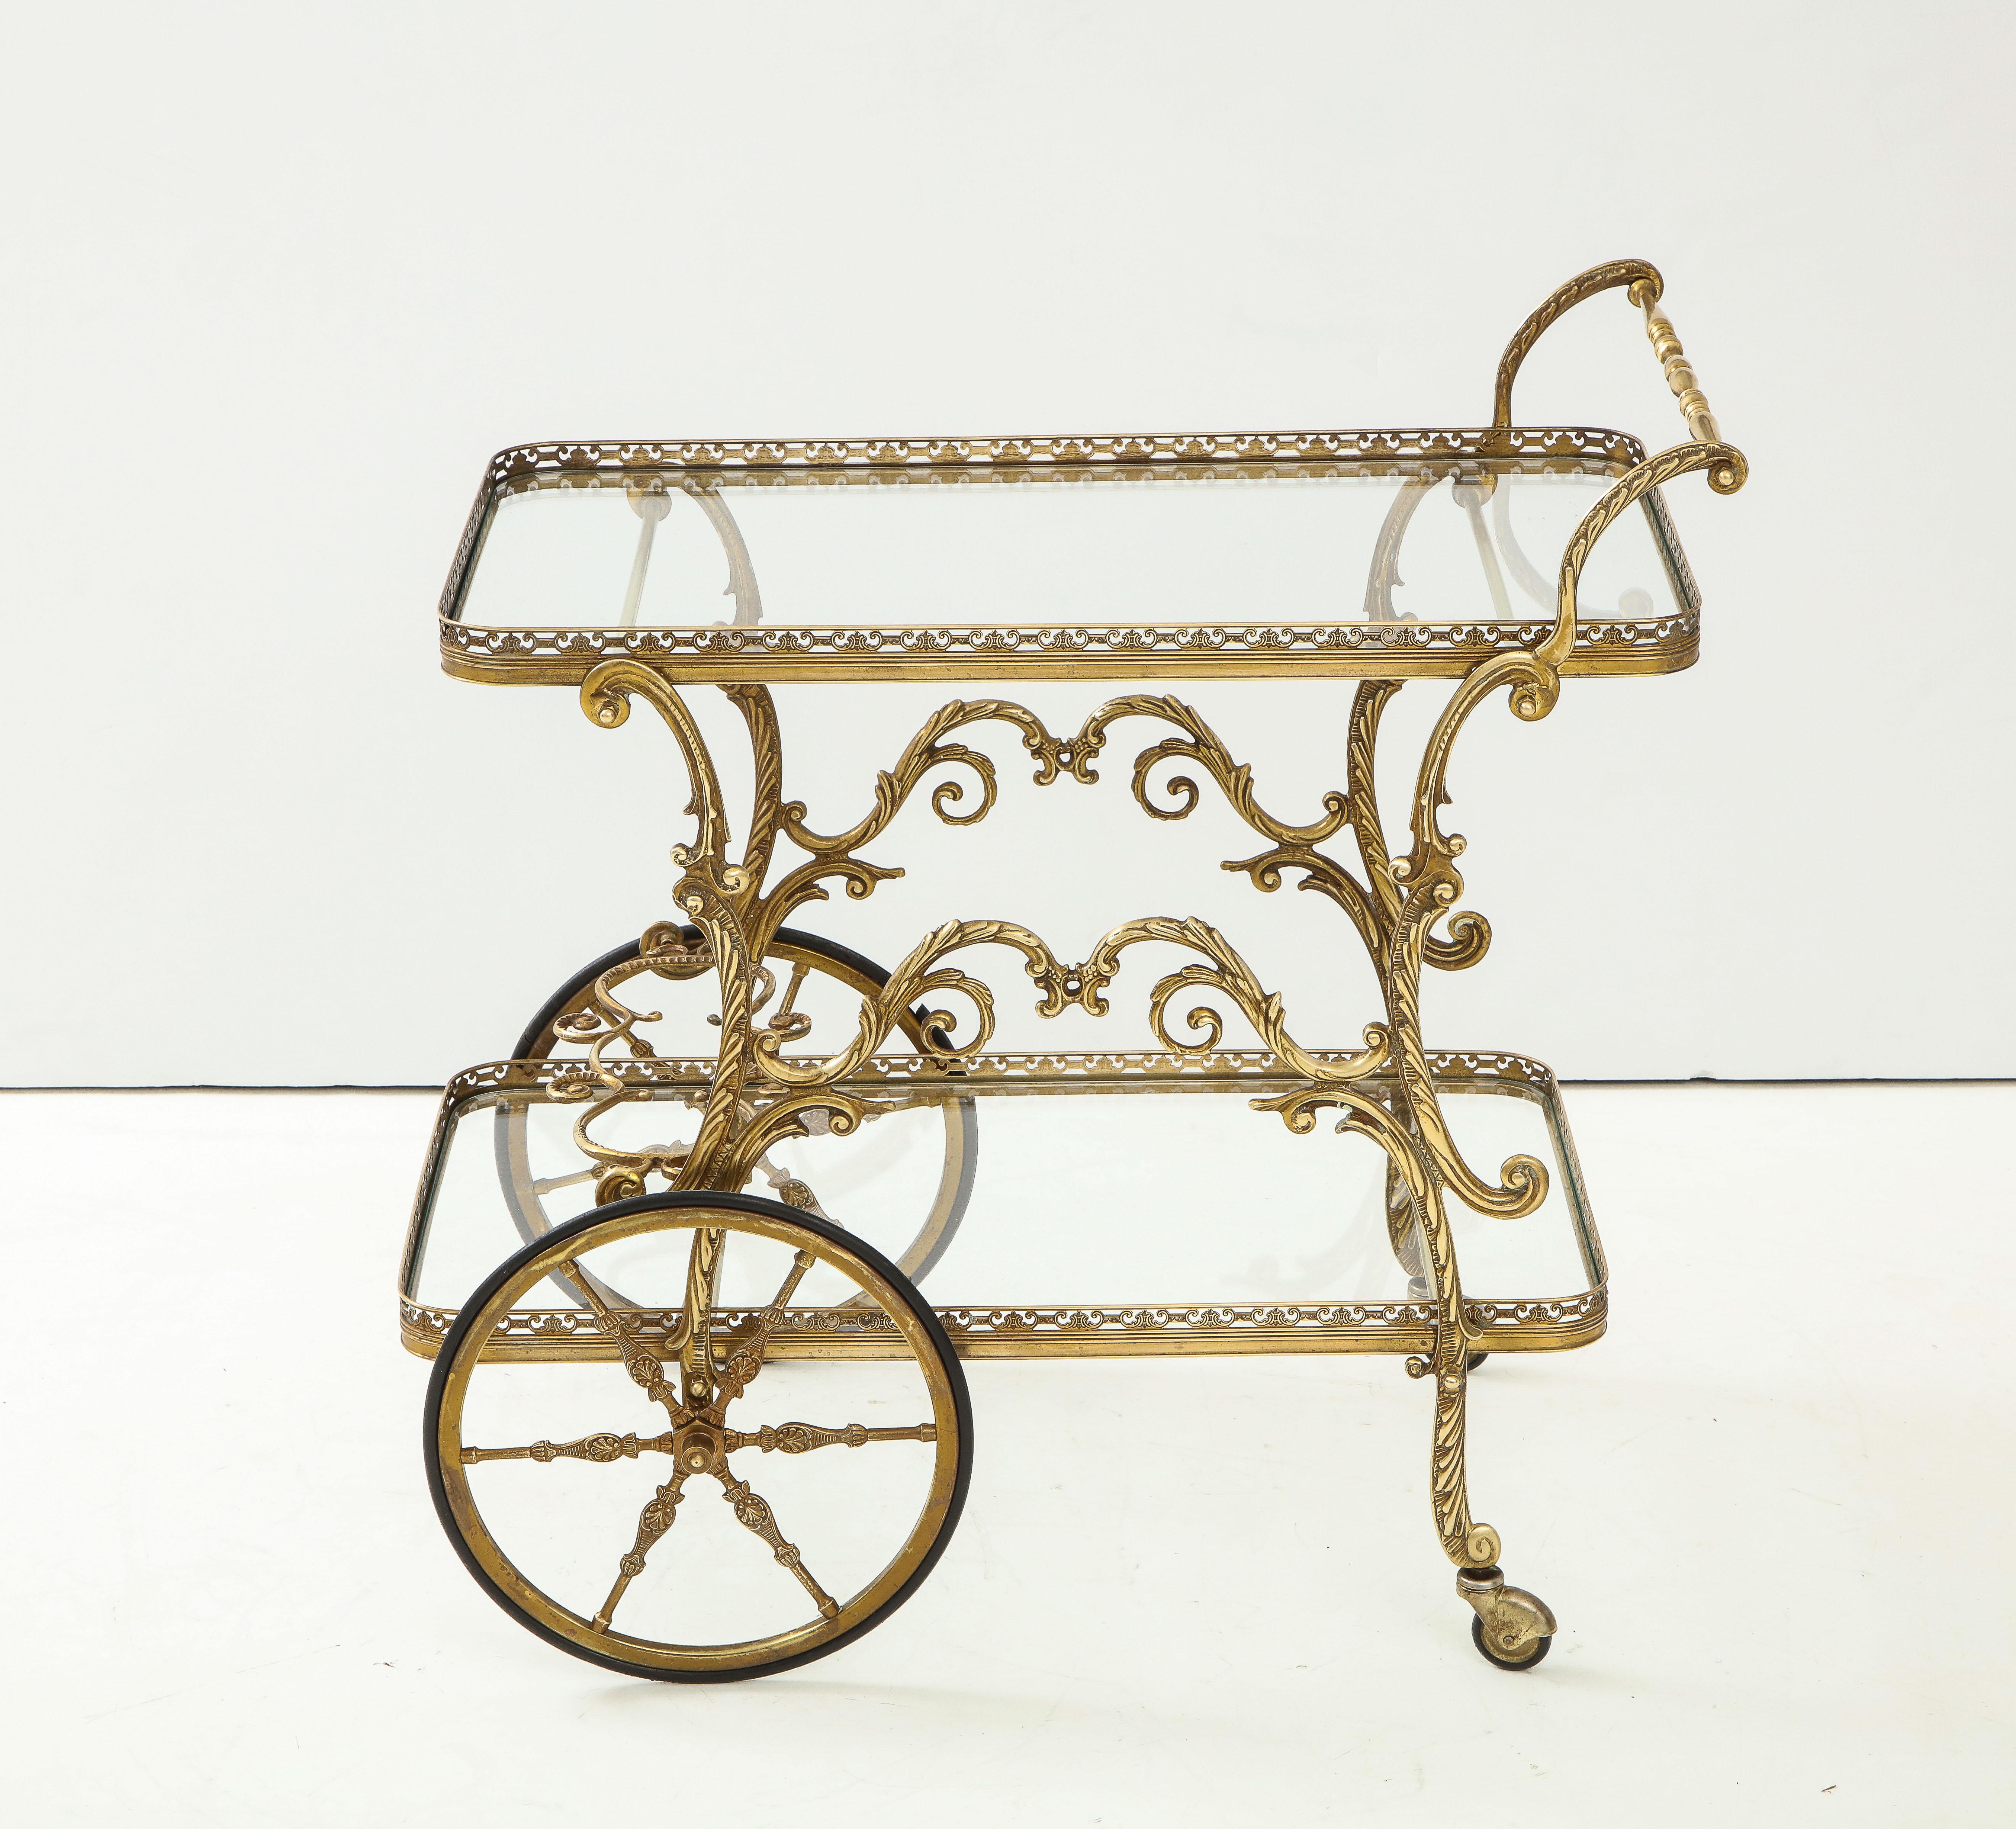 1950s Baroque style brass two-tier bar cart. In vintage original condition with some wear and patina.